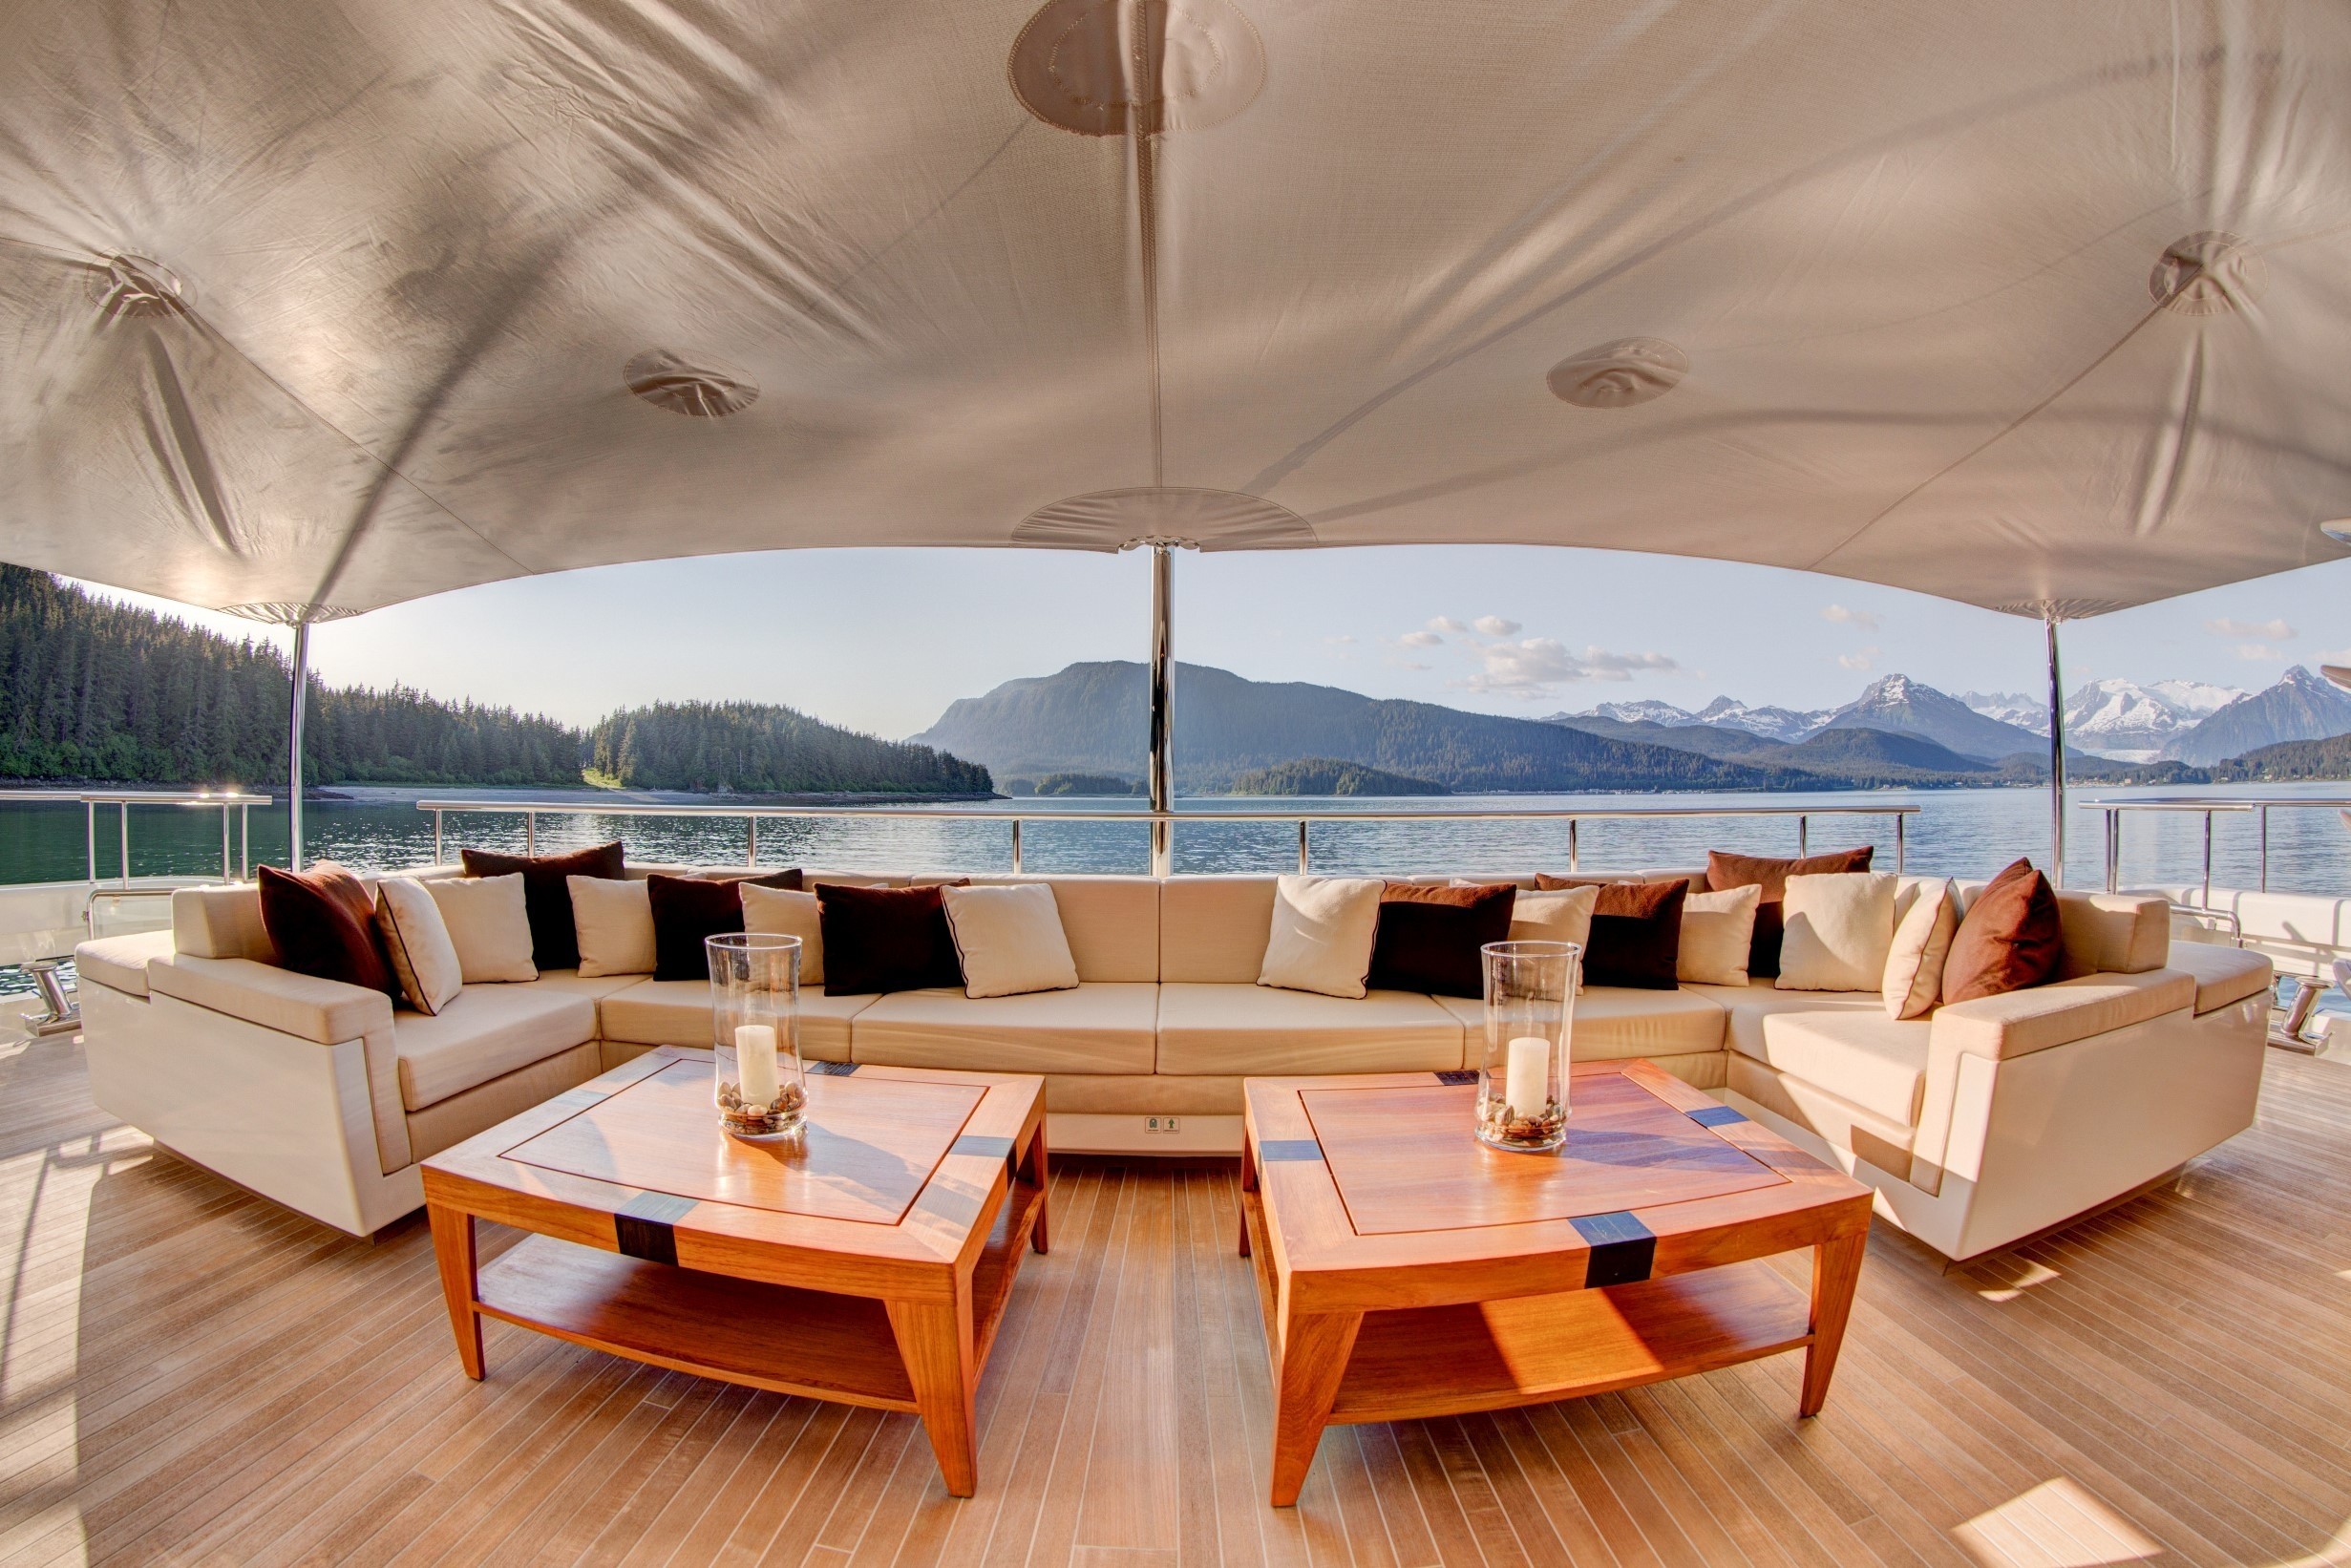 aft deck relaxation area